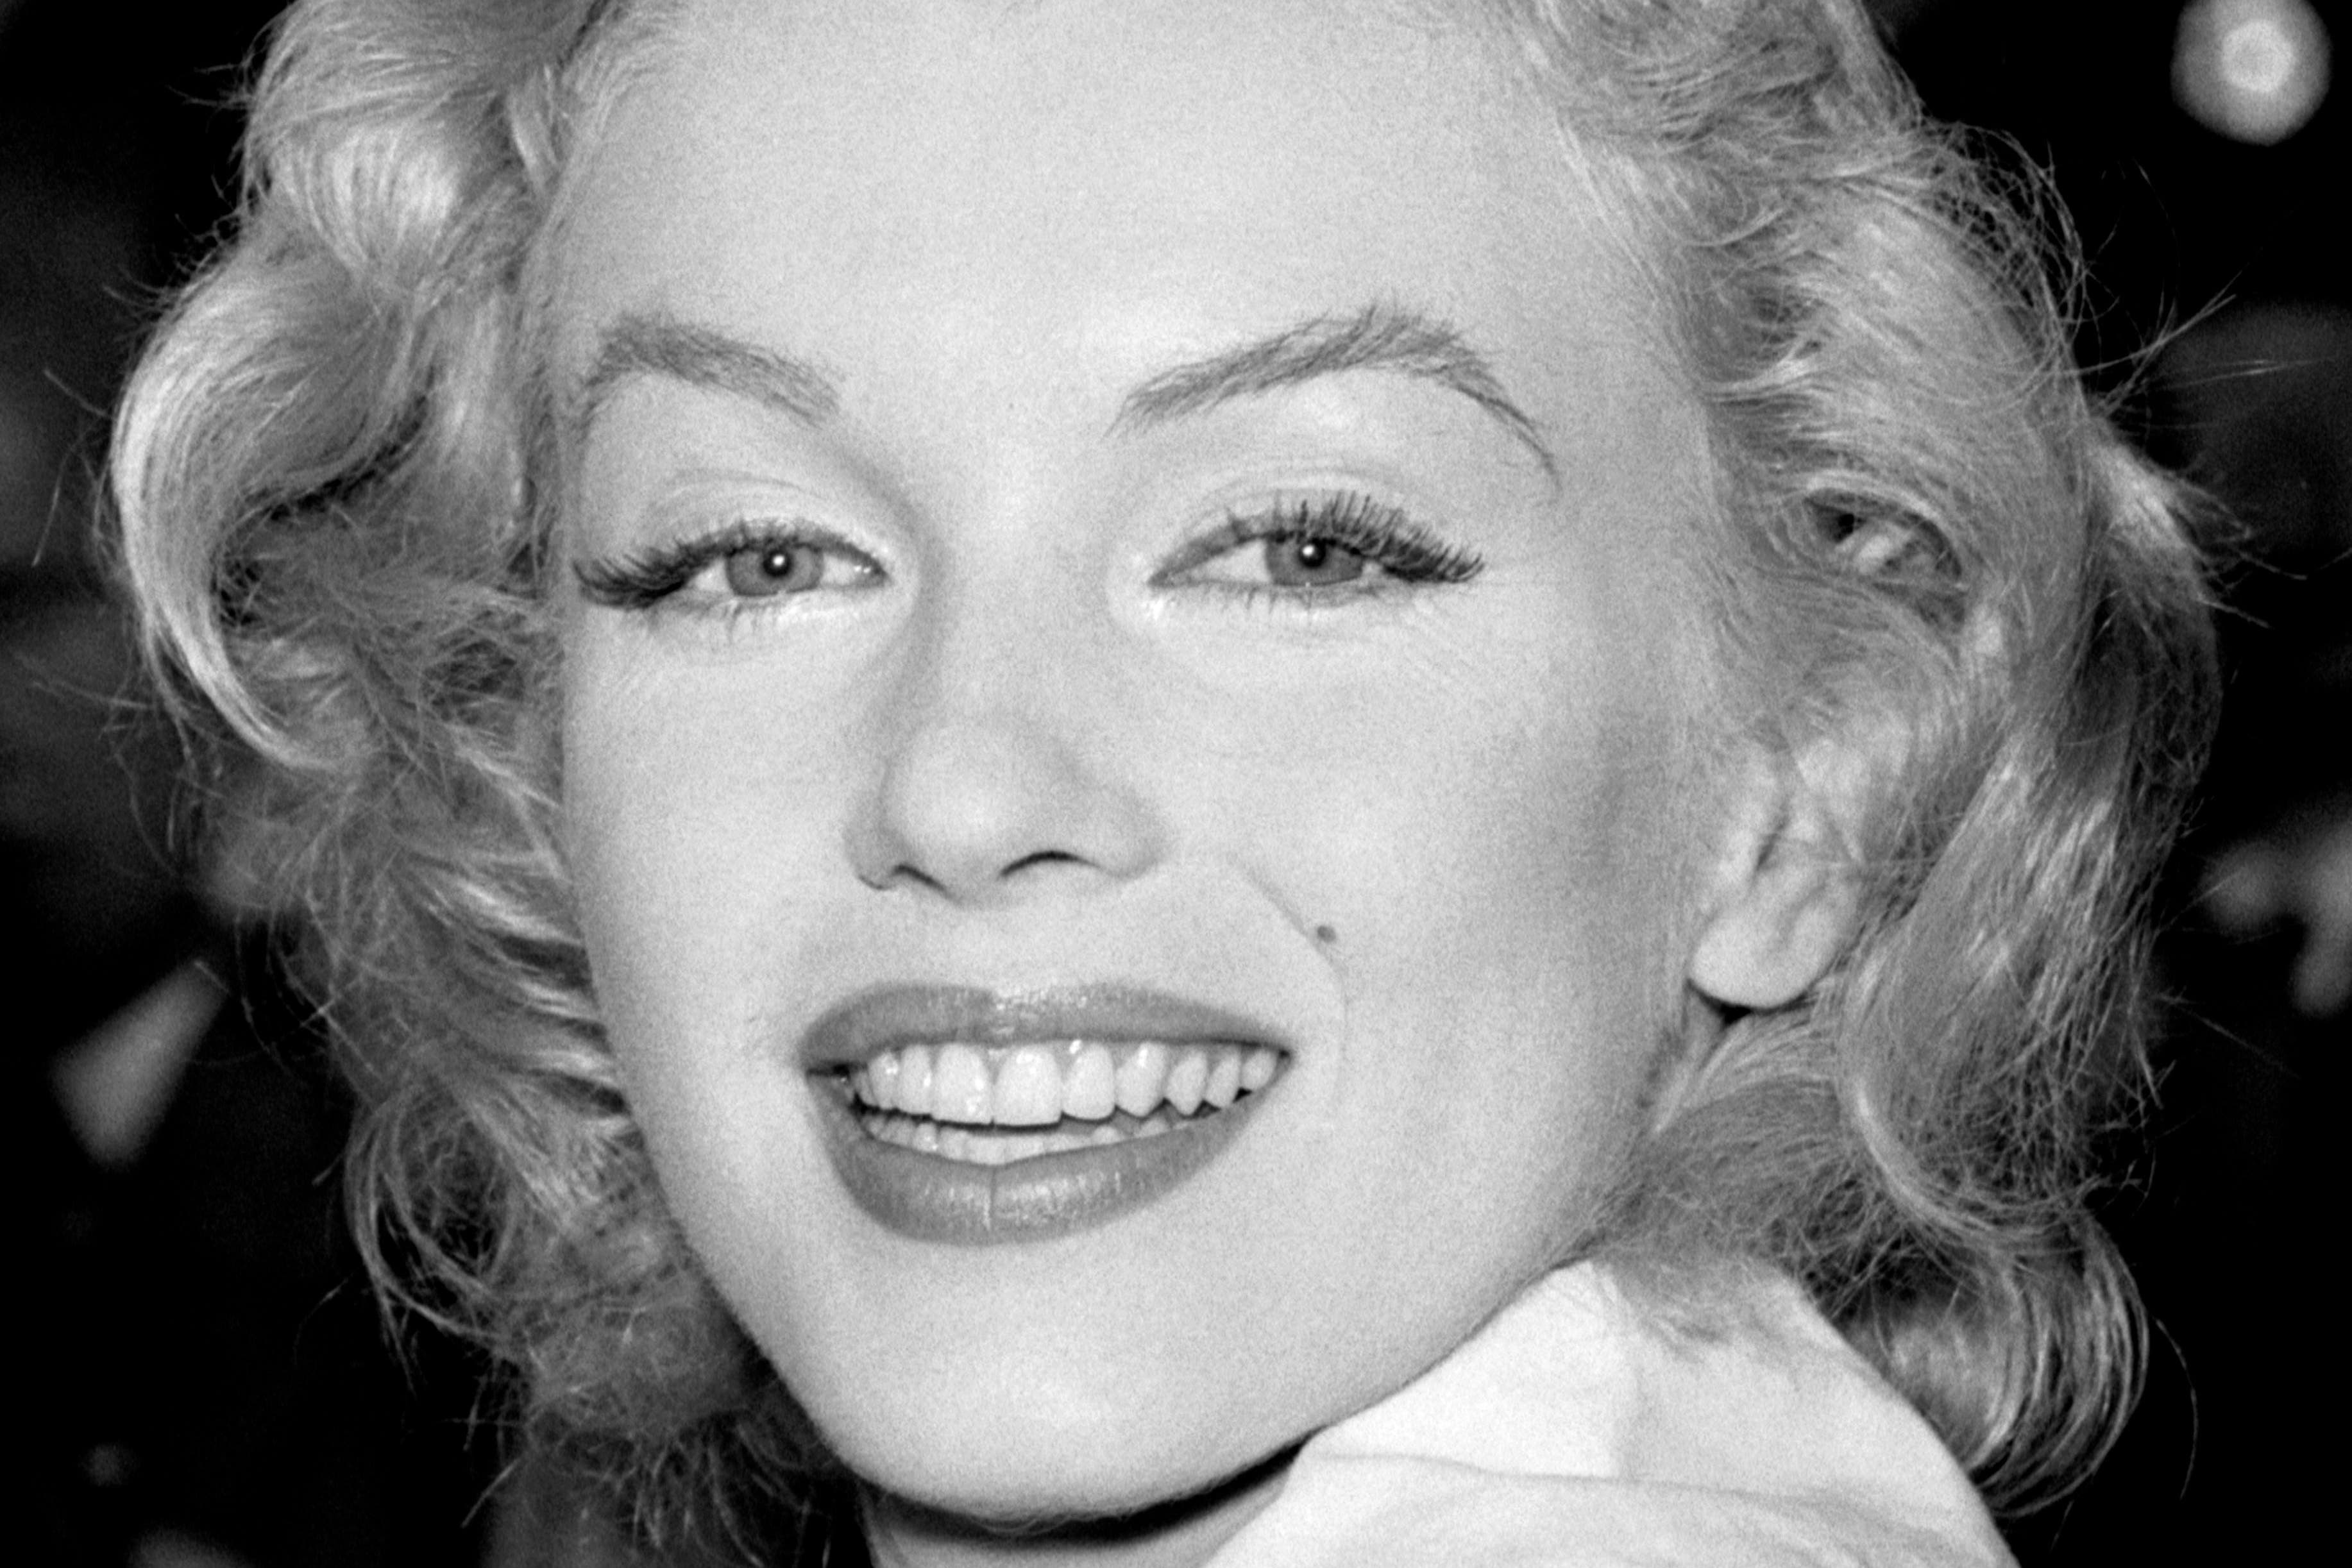 Items owned by Marilyn Monroe are to be auctioned (PA)